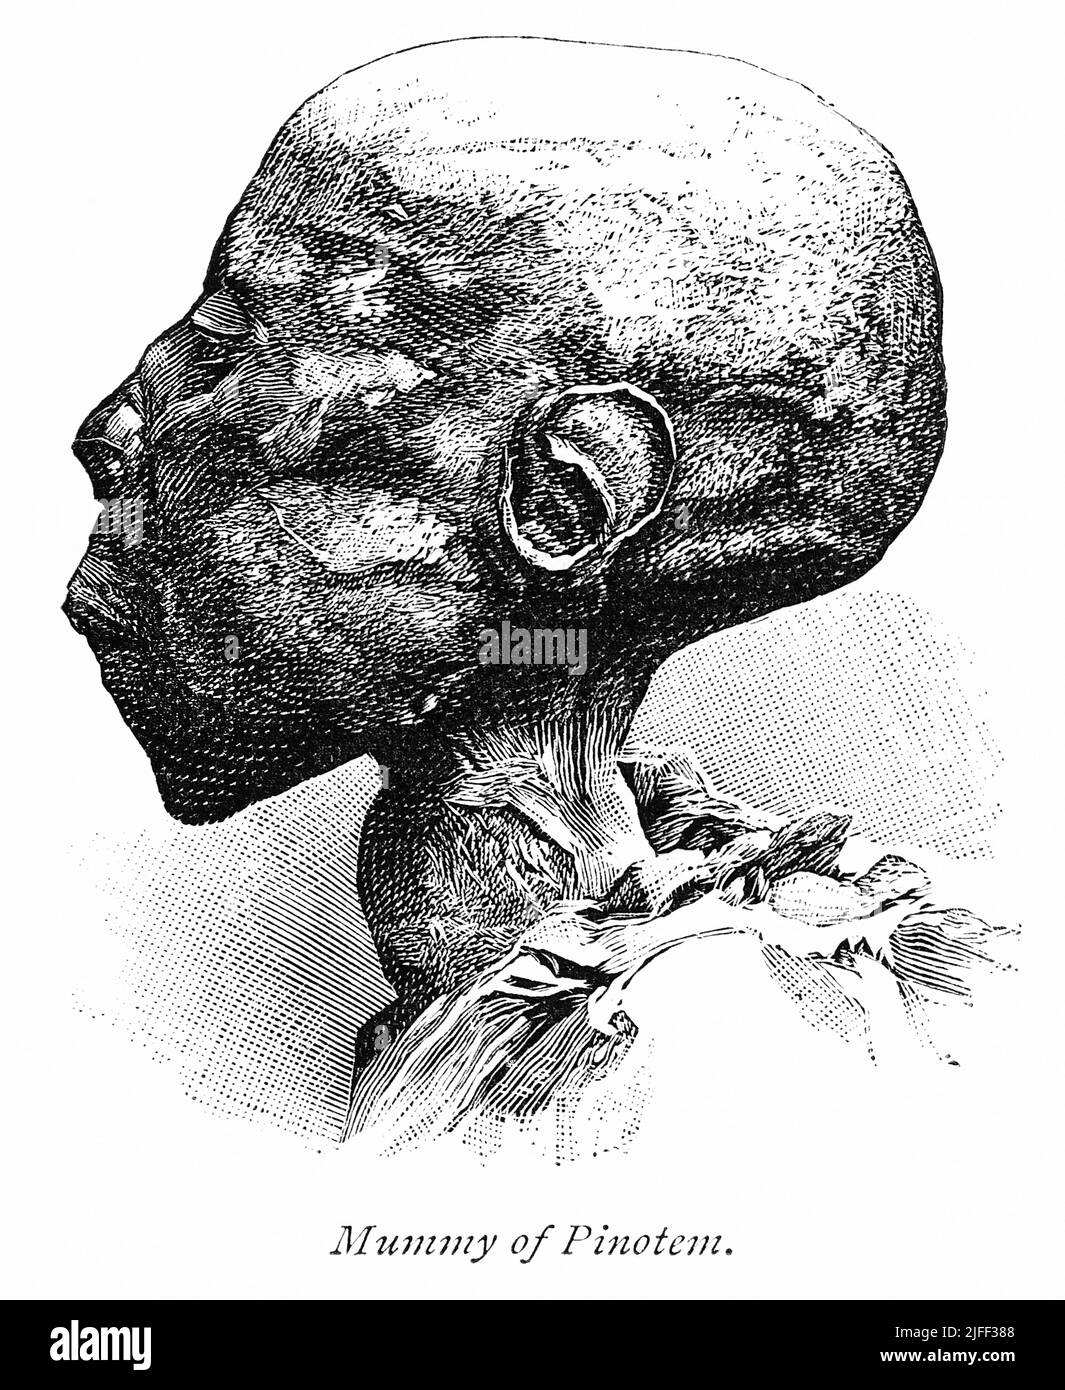 Mummy of Pinotem, Illustration from the Book, 'From Pharaoh to Fellah' by C.F. Moberly Bell with Illustrations by Georges Montbard, engraved by Charles Barbant, Wells Gardner, Darton, & Co., London, 1888 Stock Photo